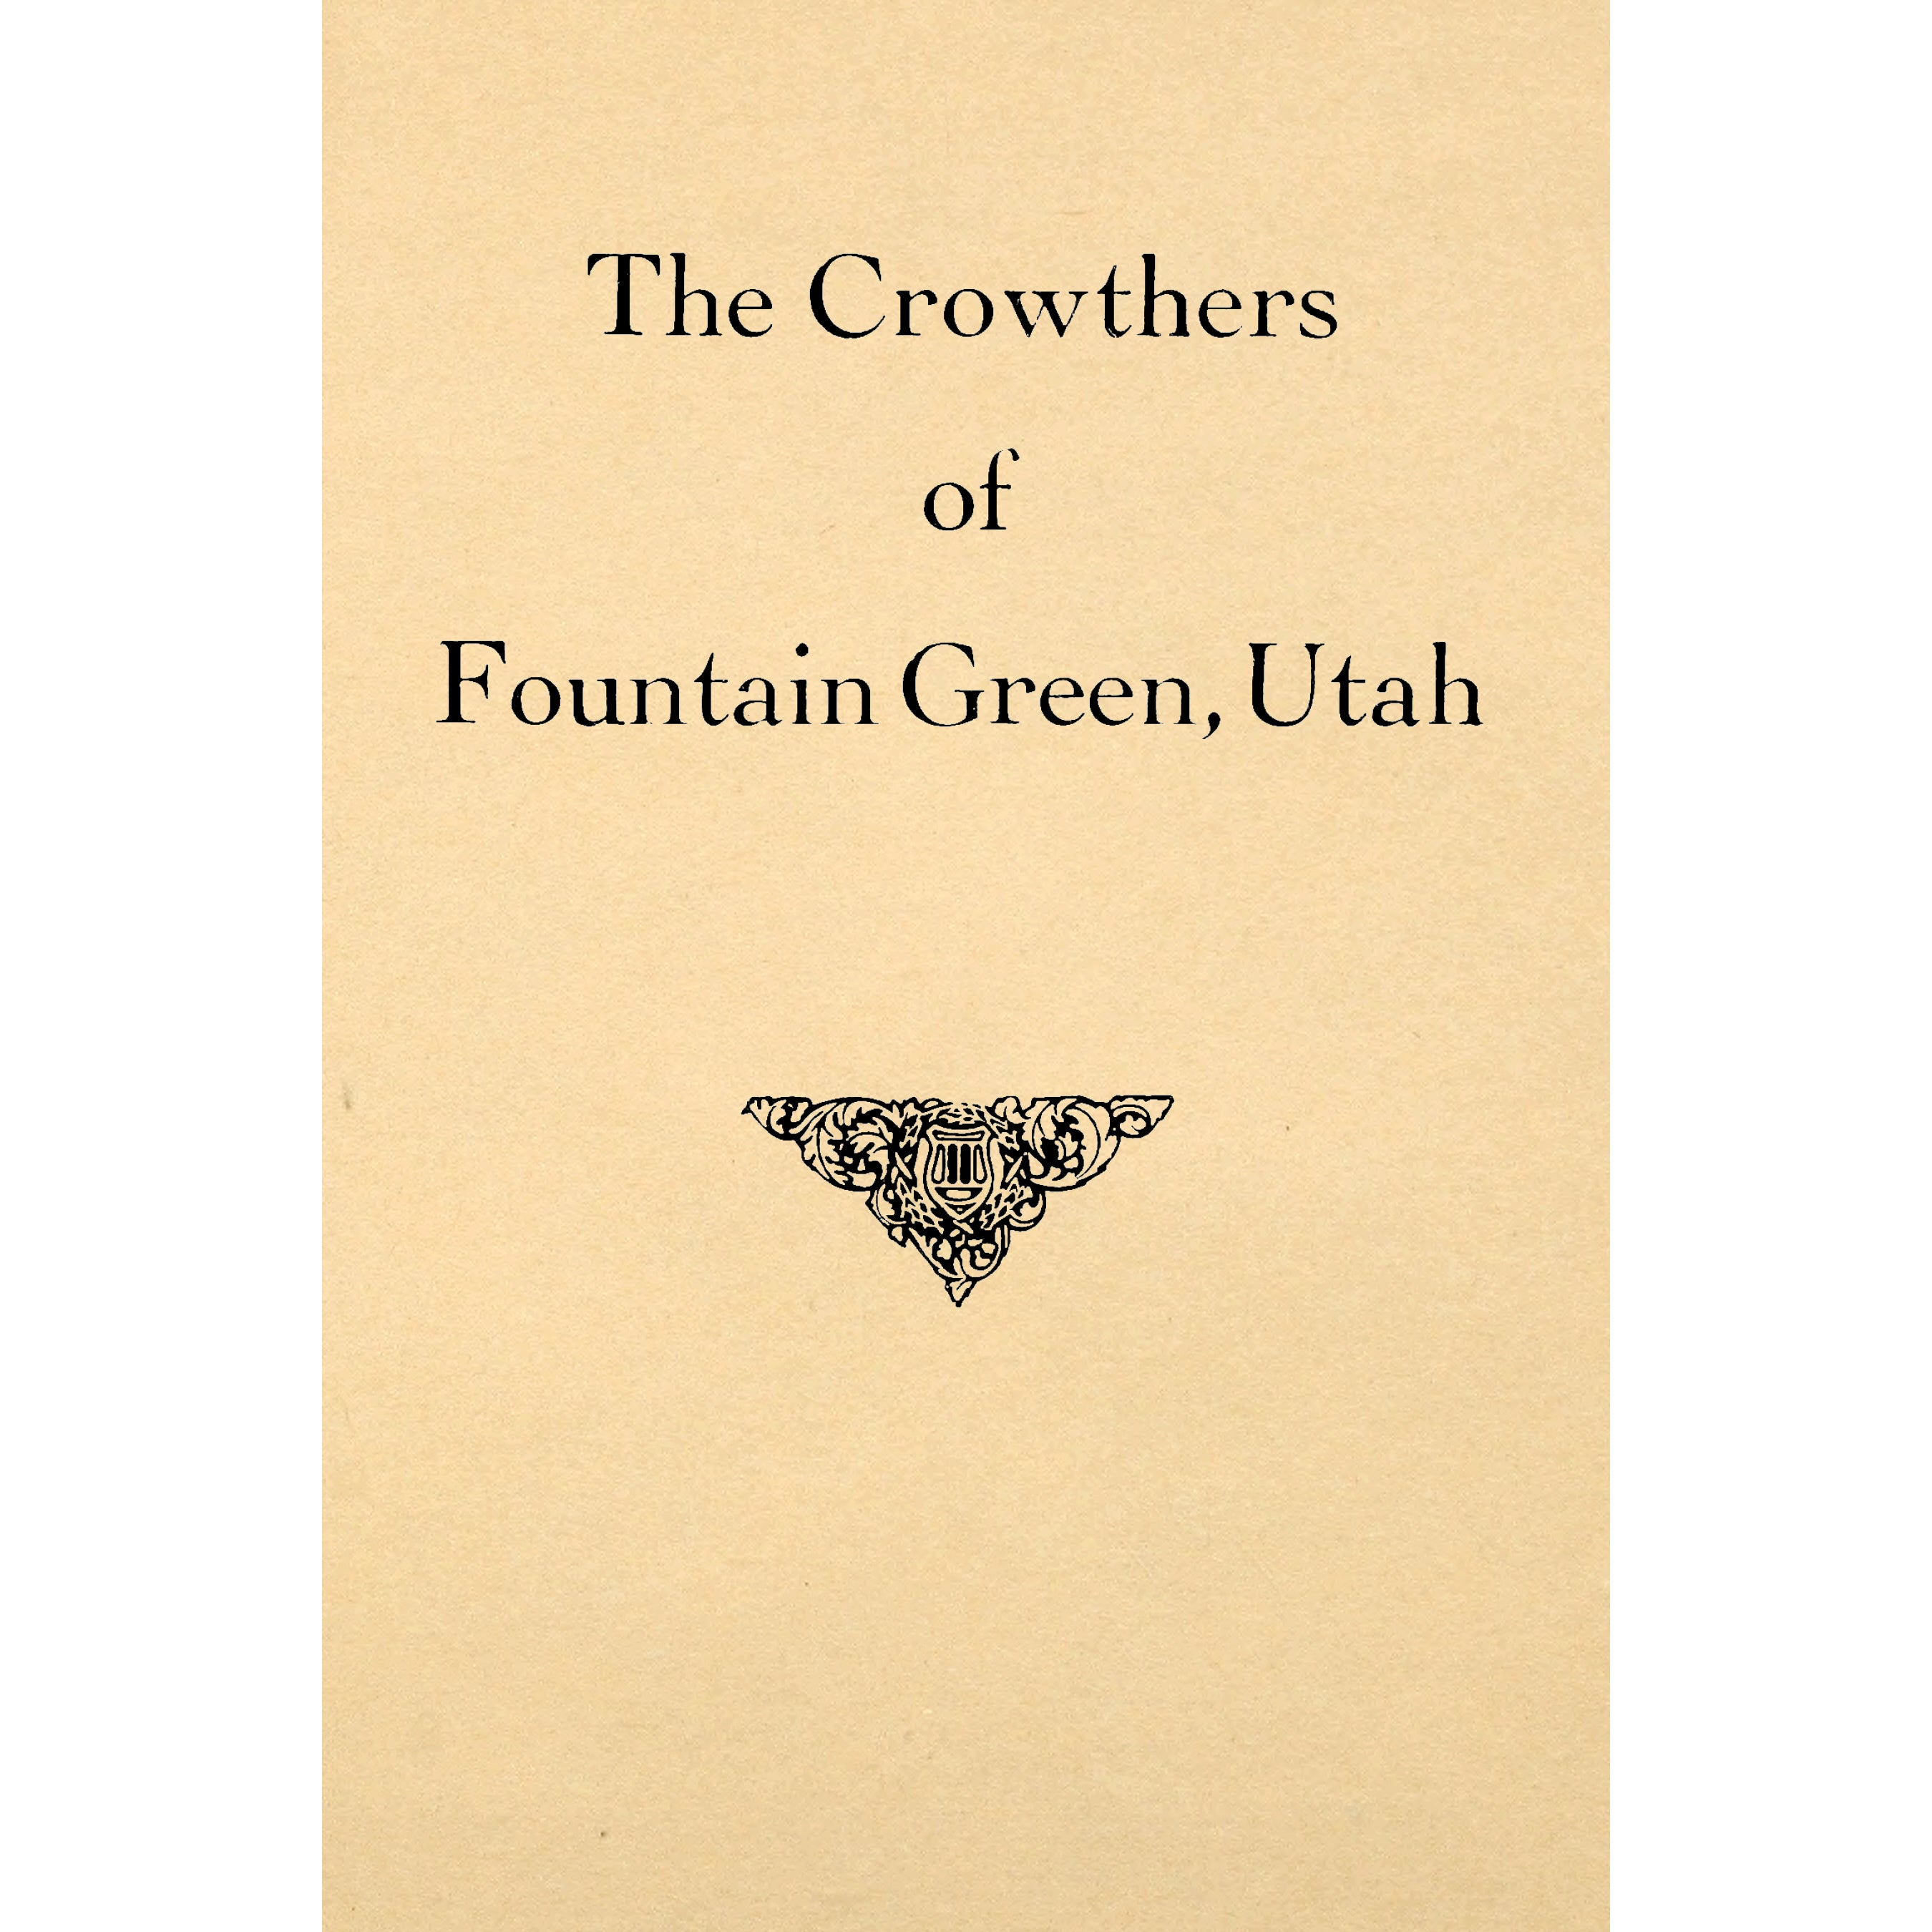 The Crowthers of Fountain Green, Utah